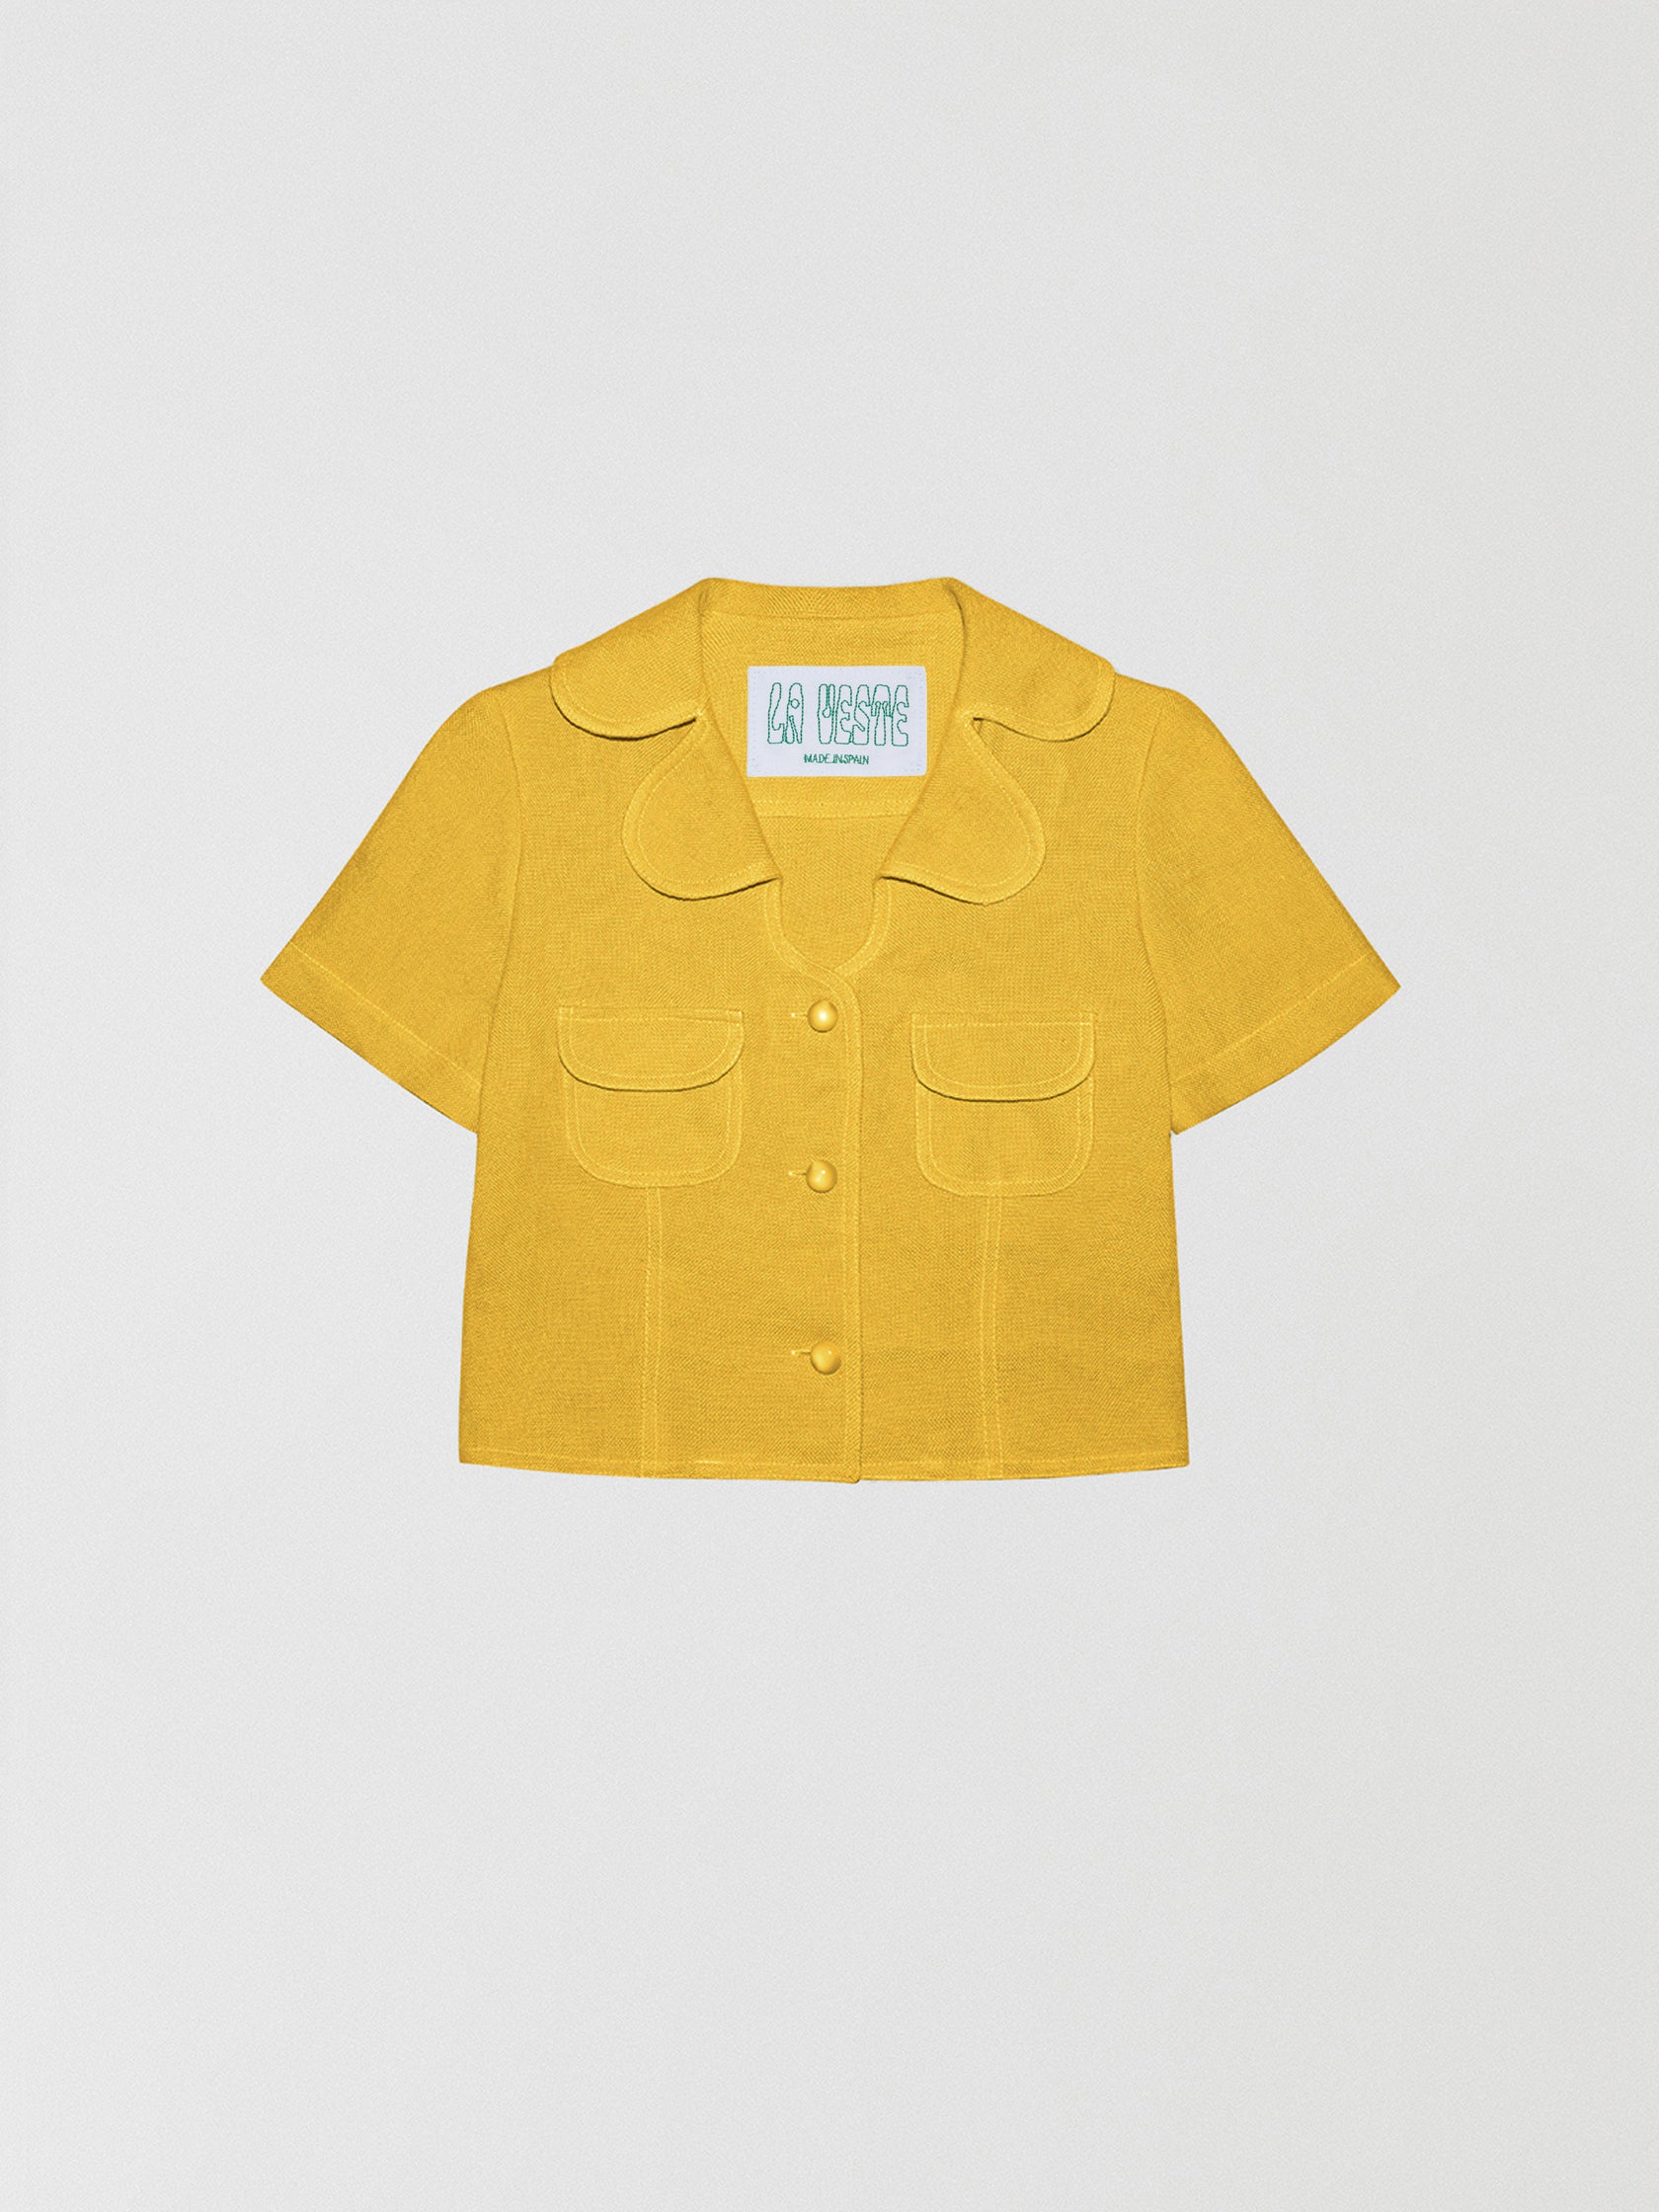 Loto Yellow Shirt is a short sleeve shirt with front buttons, two front pockets and color matched stitching.